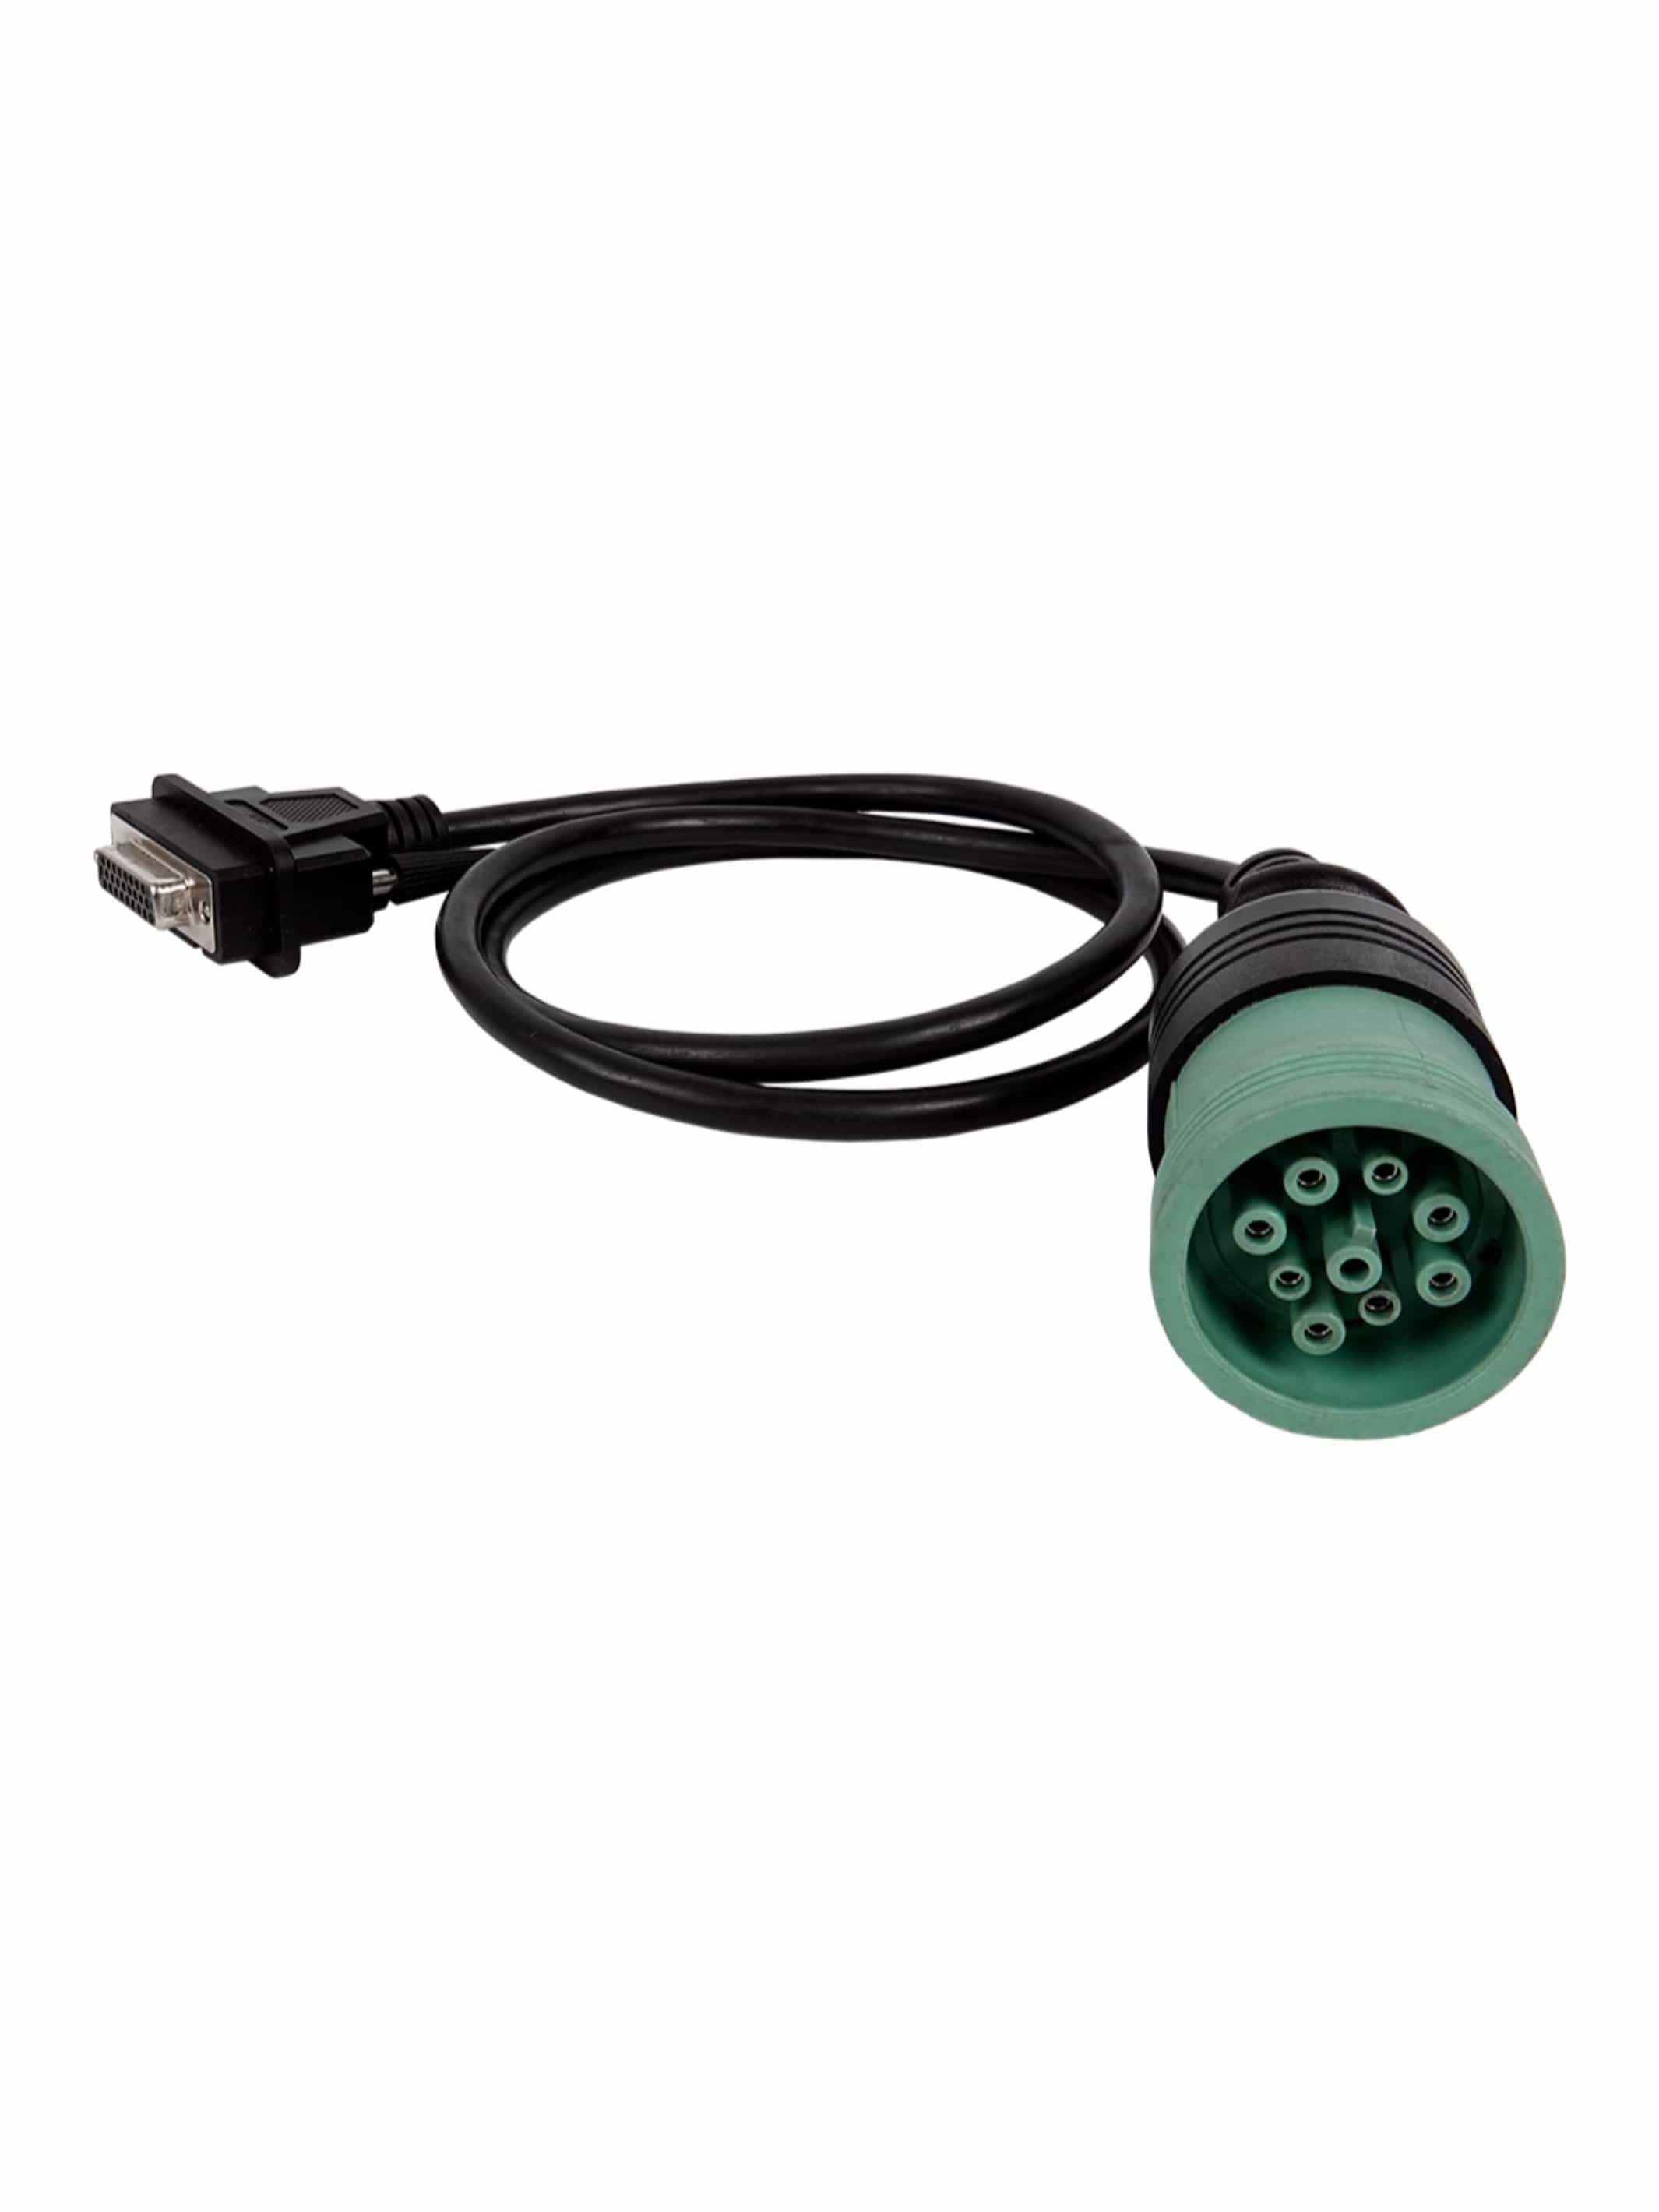 JDC217.9 Deutsch 9 Pin Type 2 Green Diagnostics Cable - Jaltest Agricultural, Commercial Vehicle, Material Handling, Construction & Heavy Equipment Diagnostic Kit